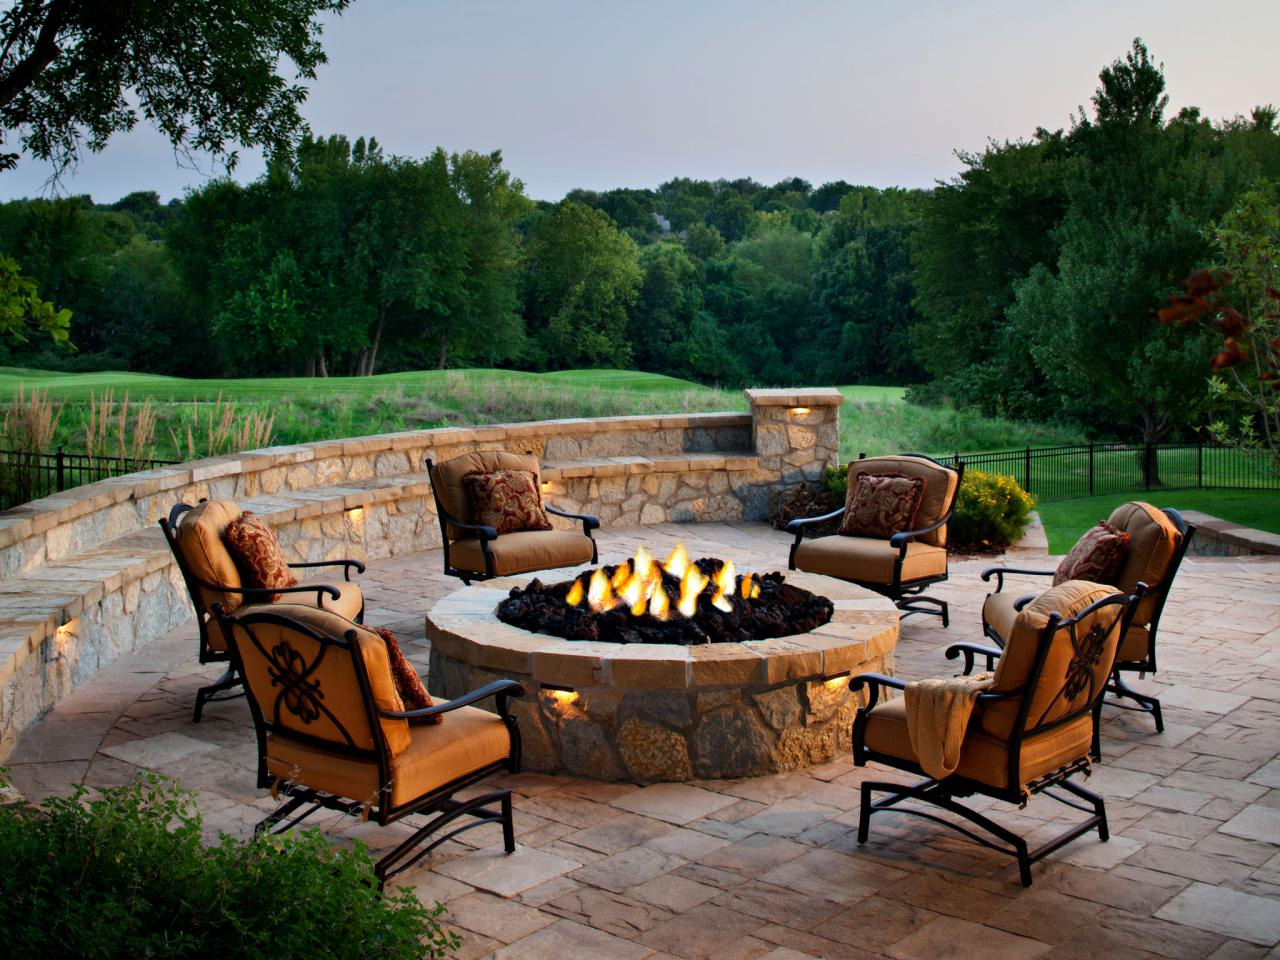 Tips To A Long-Lasting Backyard Fire pit